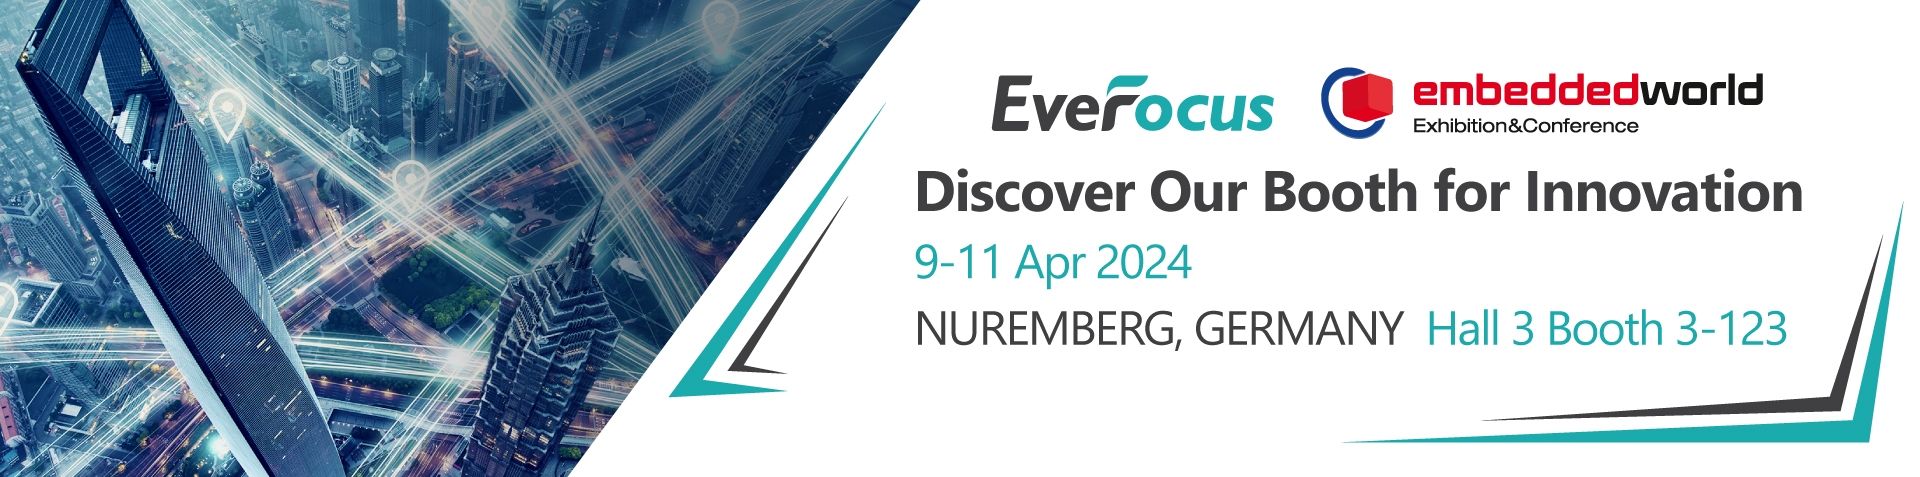 EverFocus to Unveil Cutting-Edge AI Computing Solutions at Embedded World 2024